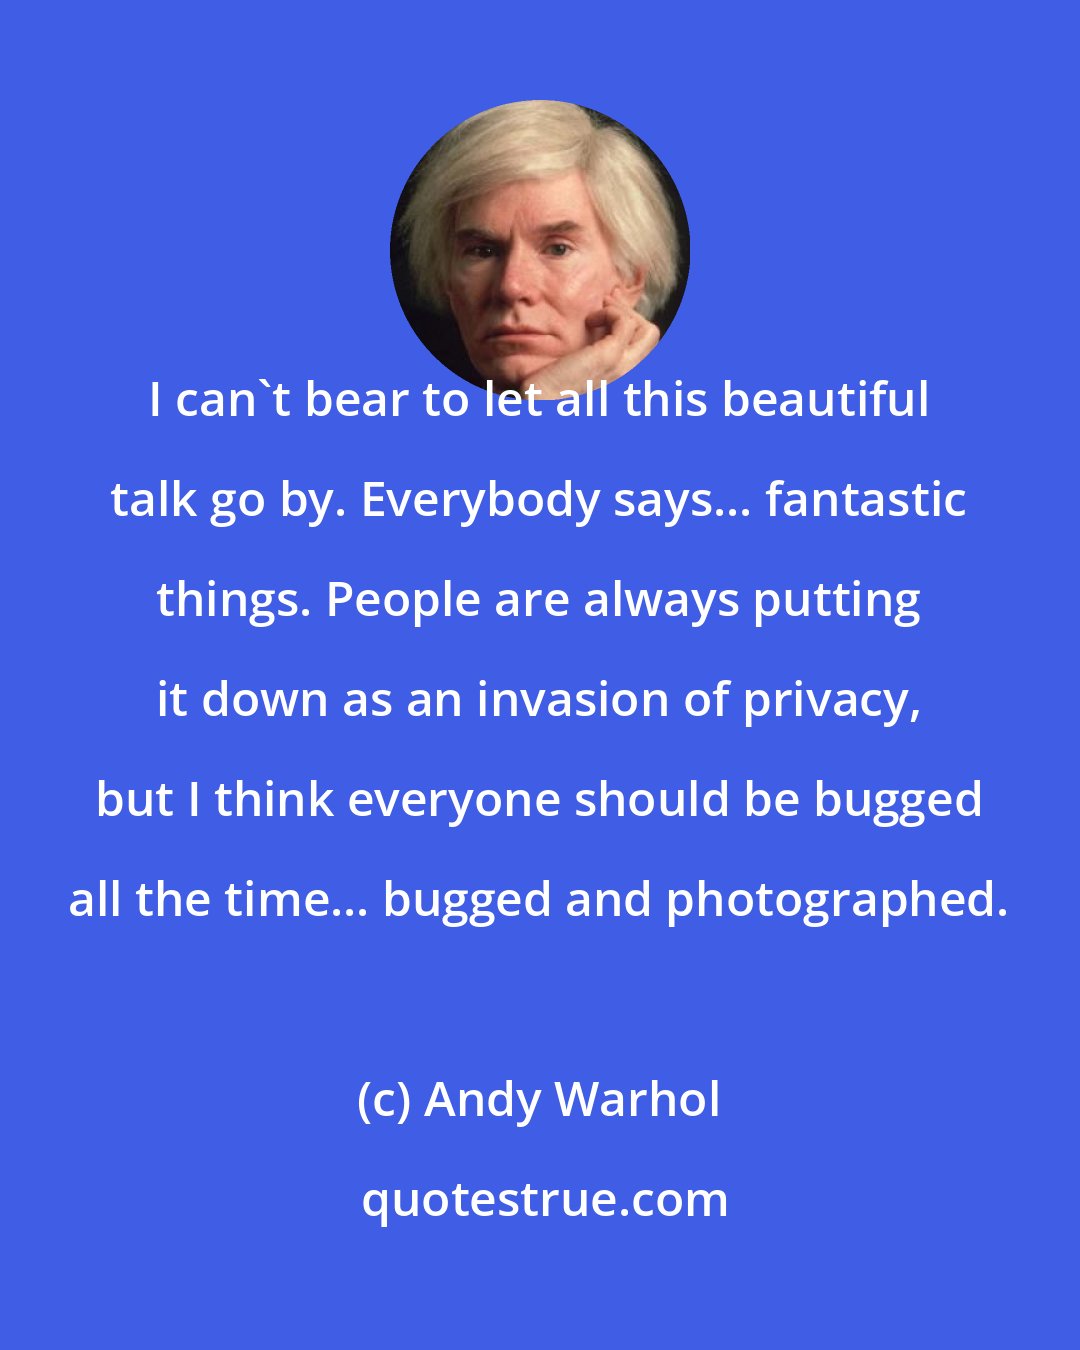 Andy Warhol: I can't bear to let all this beautiful talk go by. Everybody says... fantastic things. People are always putting it down as an invasion of privacy, but I think everyone should be bugged all the time... bugged and photographed.